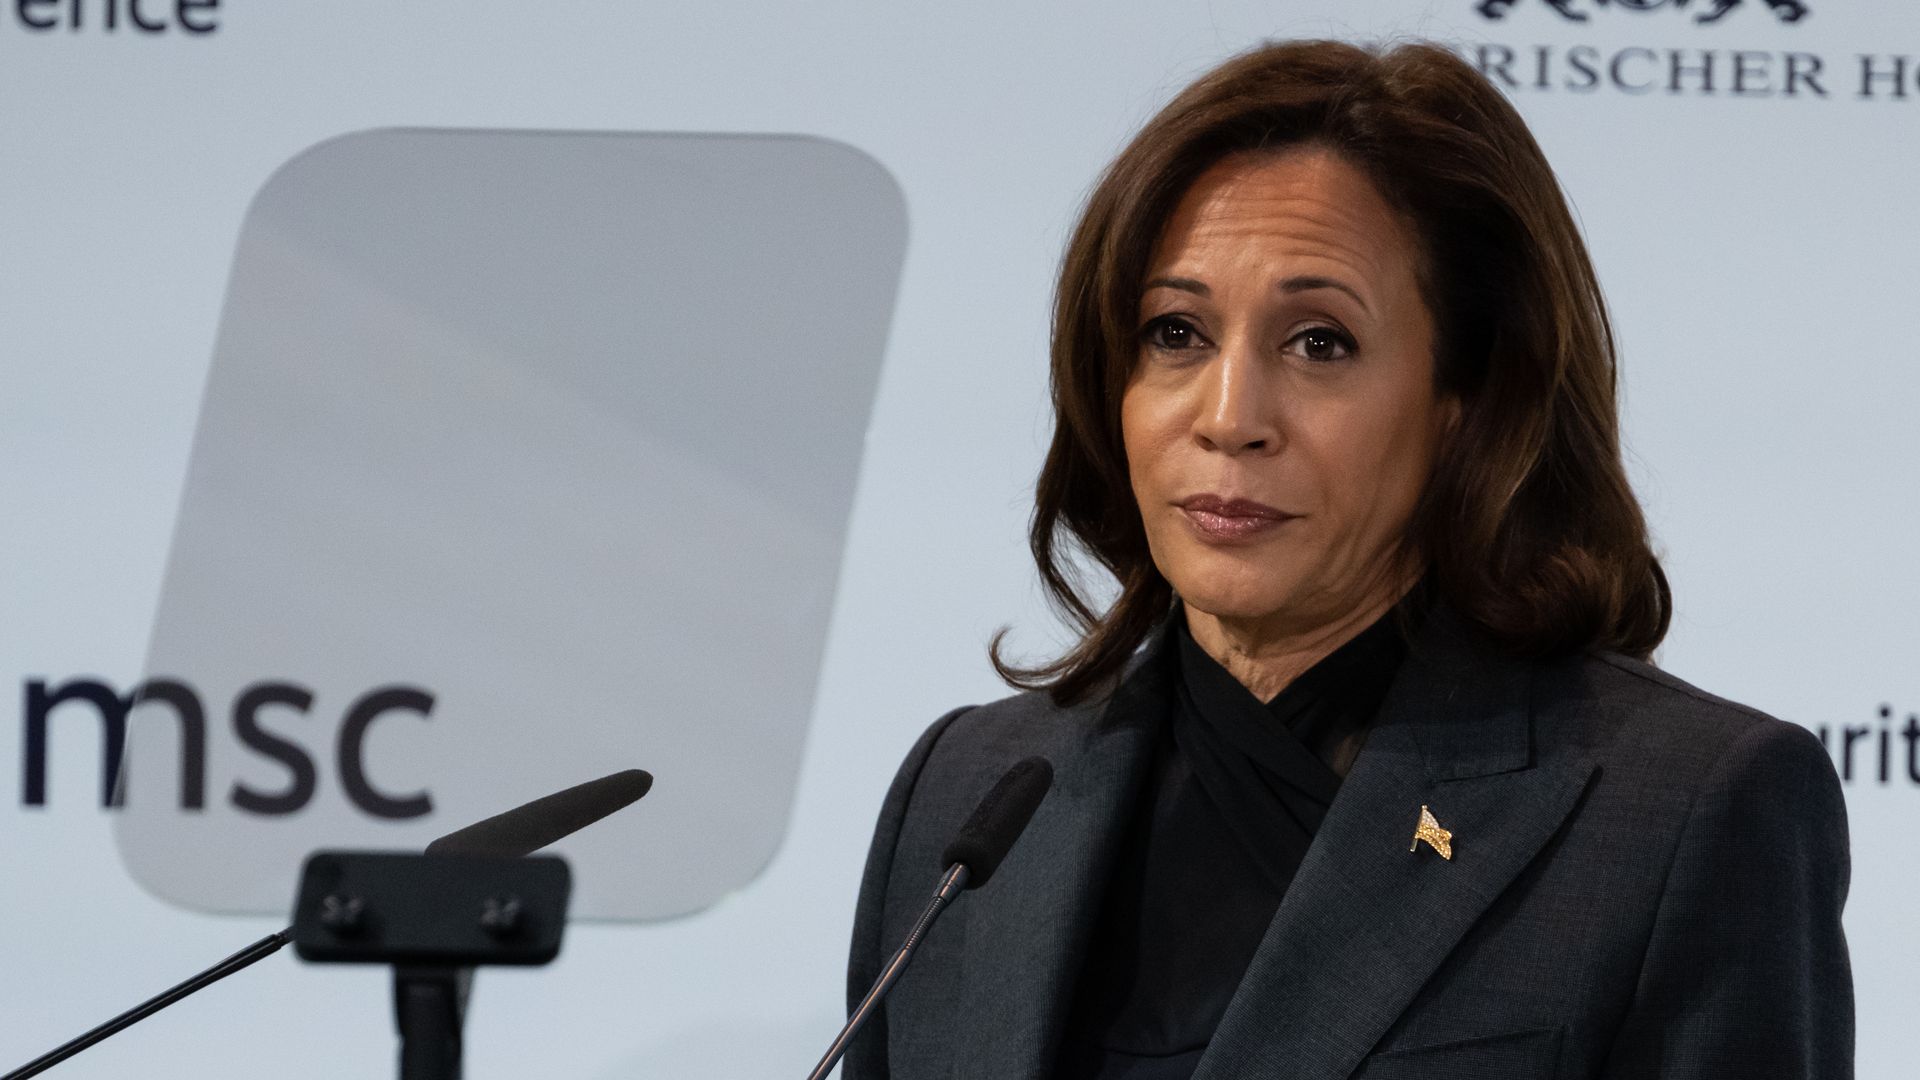 Vice President Kamala Harris speaks at the Munich Security Conference on Feb. 18.